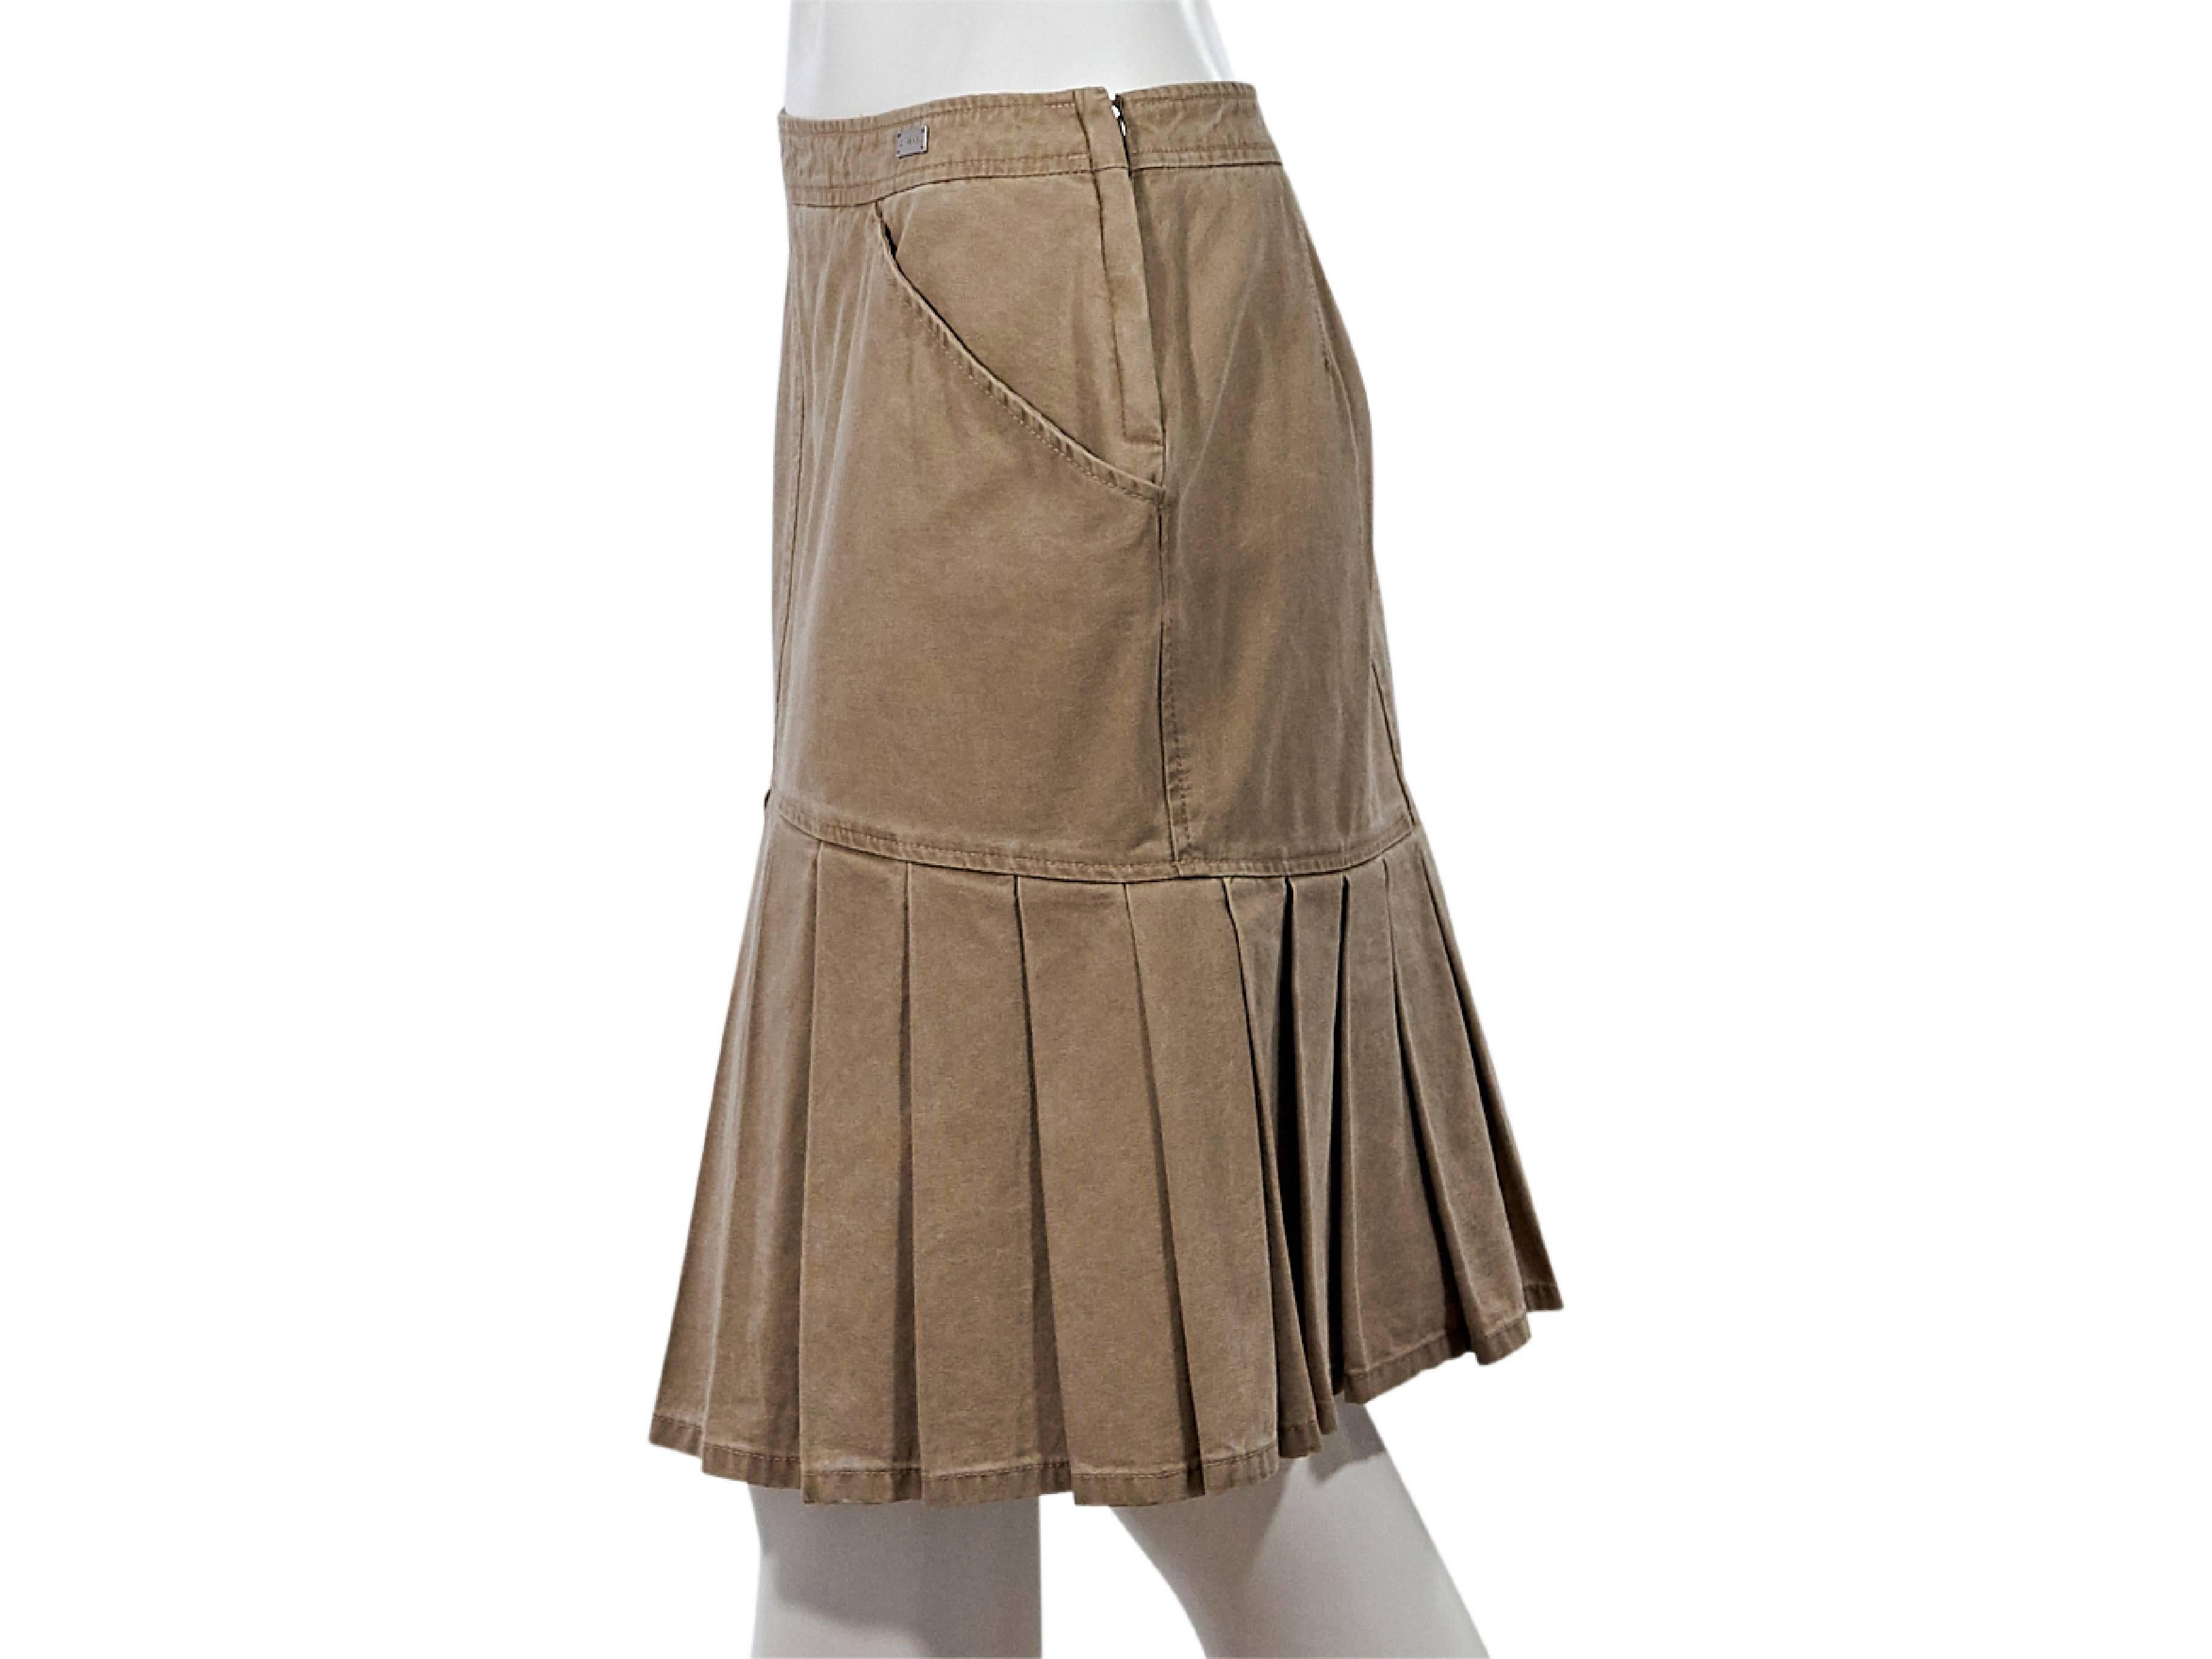 Product details:  Tan denim skirt by Chanel.  Banded waist.  Waist slant slide pockets.  Concealed side zip closure.  Box pleated hem. 
Condition: Pre-owned. Very good.
Est. Retail: $ 1,500.00